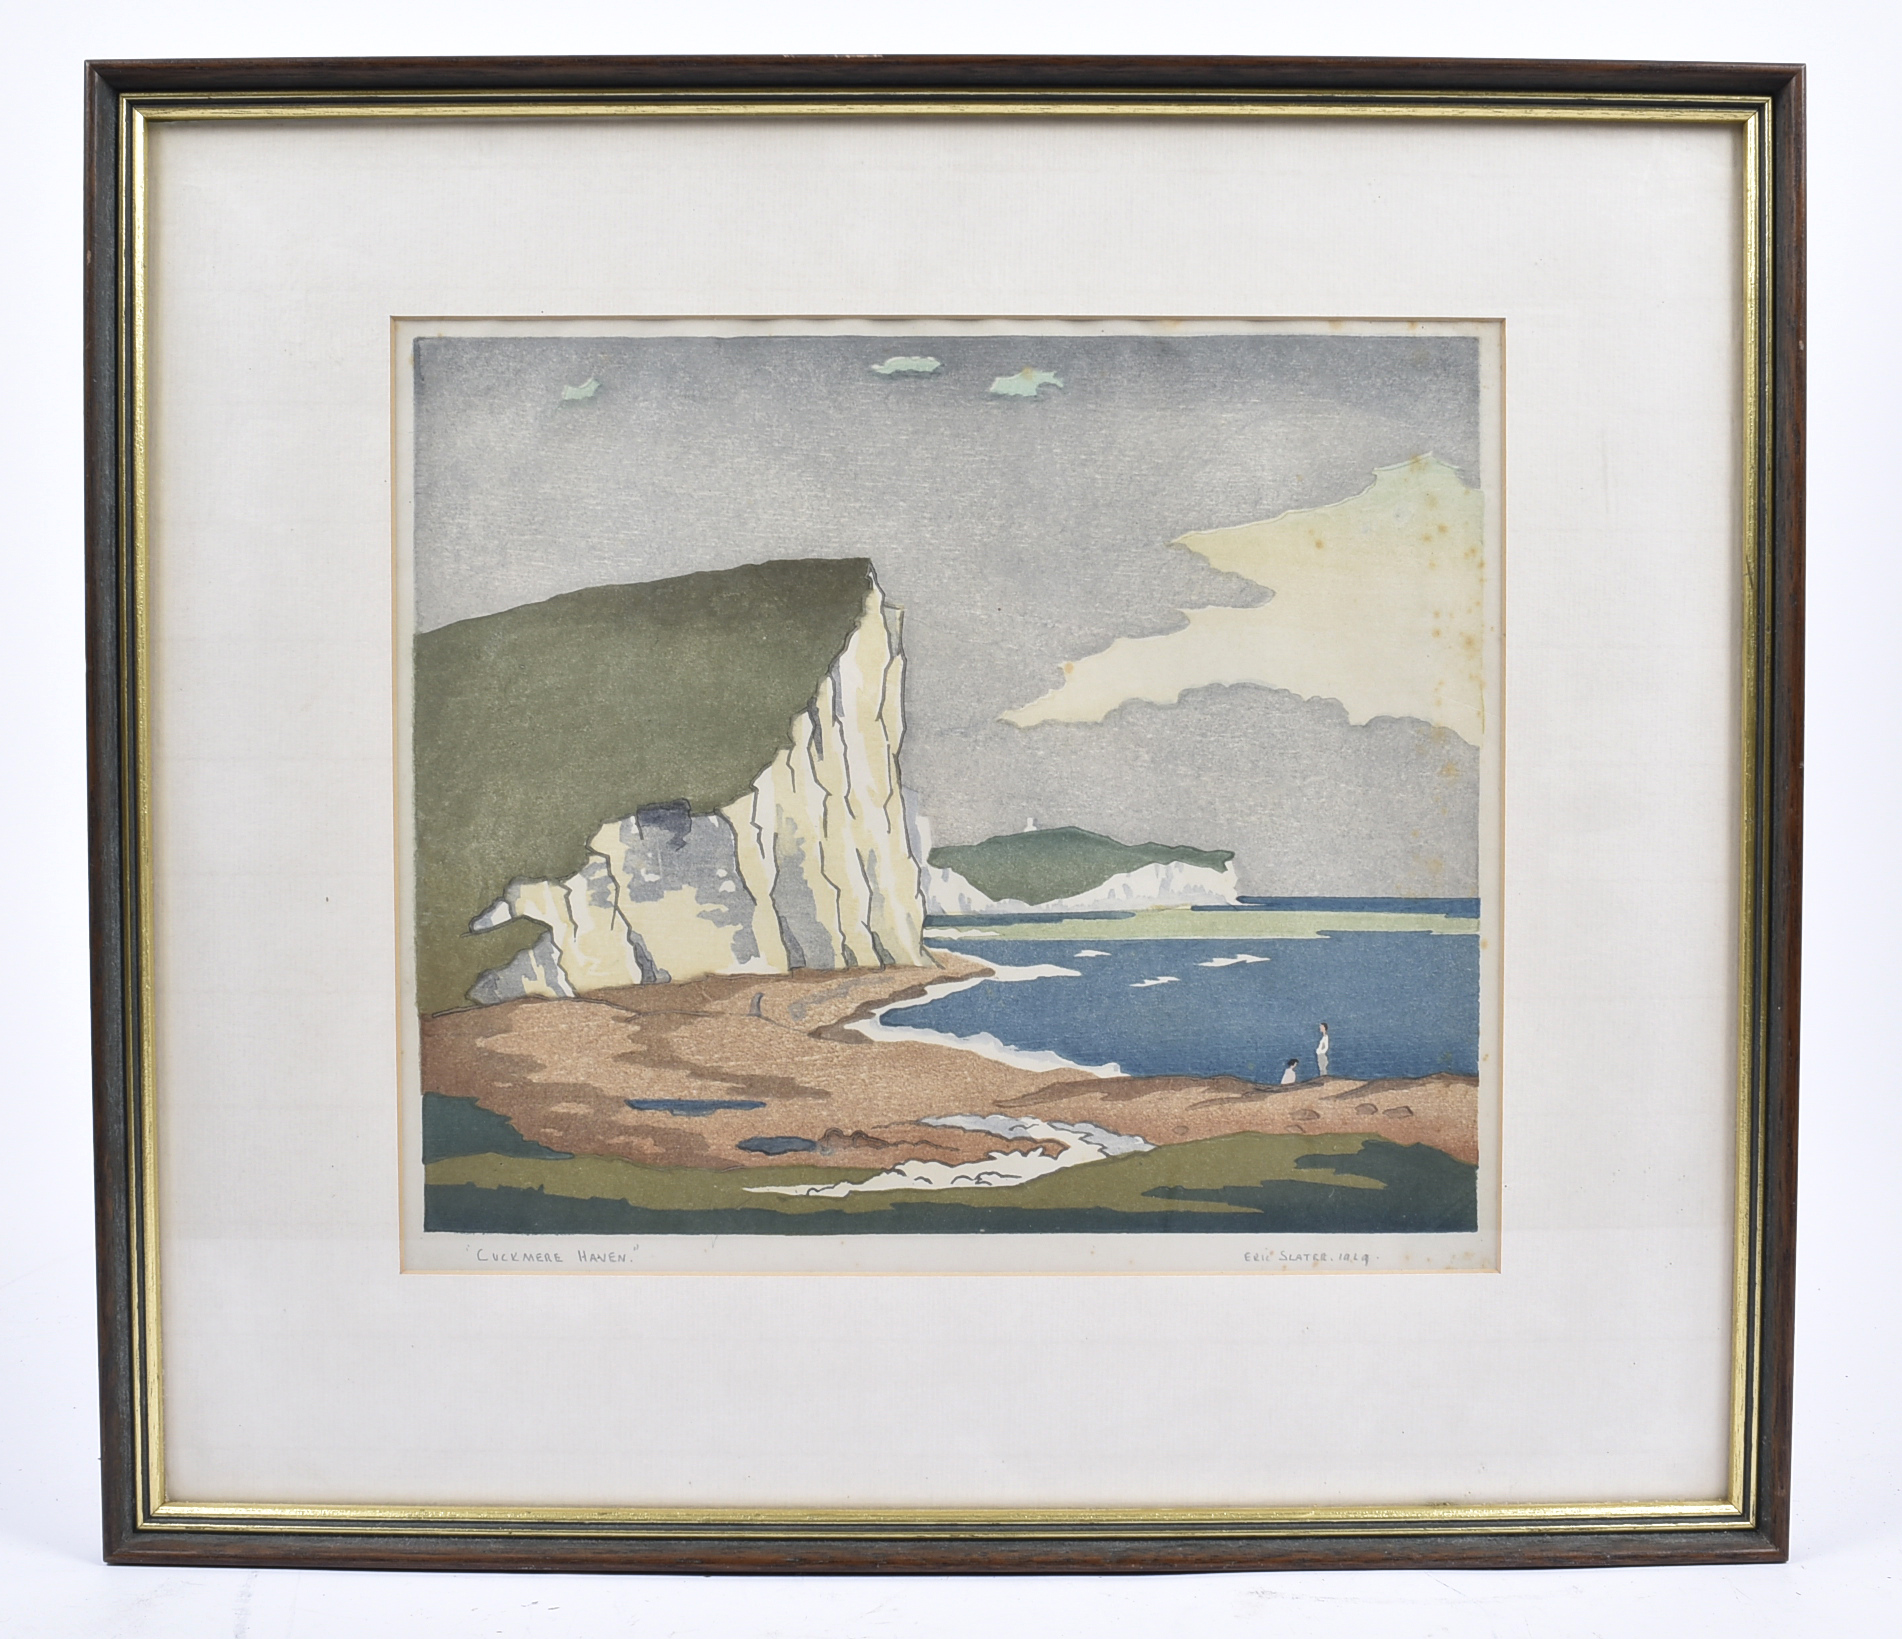 Eric Slater (1896-1963) coloured woodcut, 'Cuckmere Haven', 1929, signed, dated and titled in pencil - Image 2 of 2